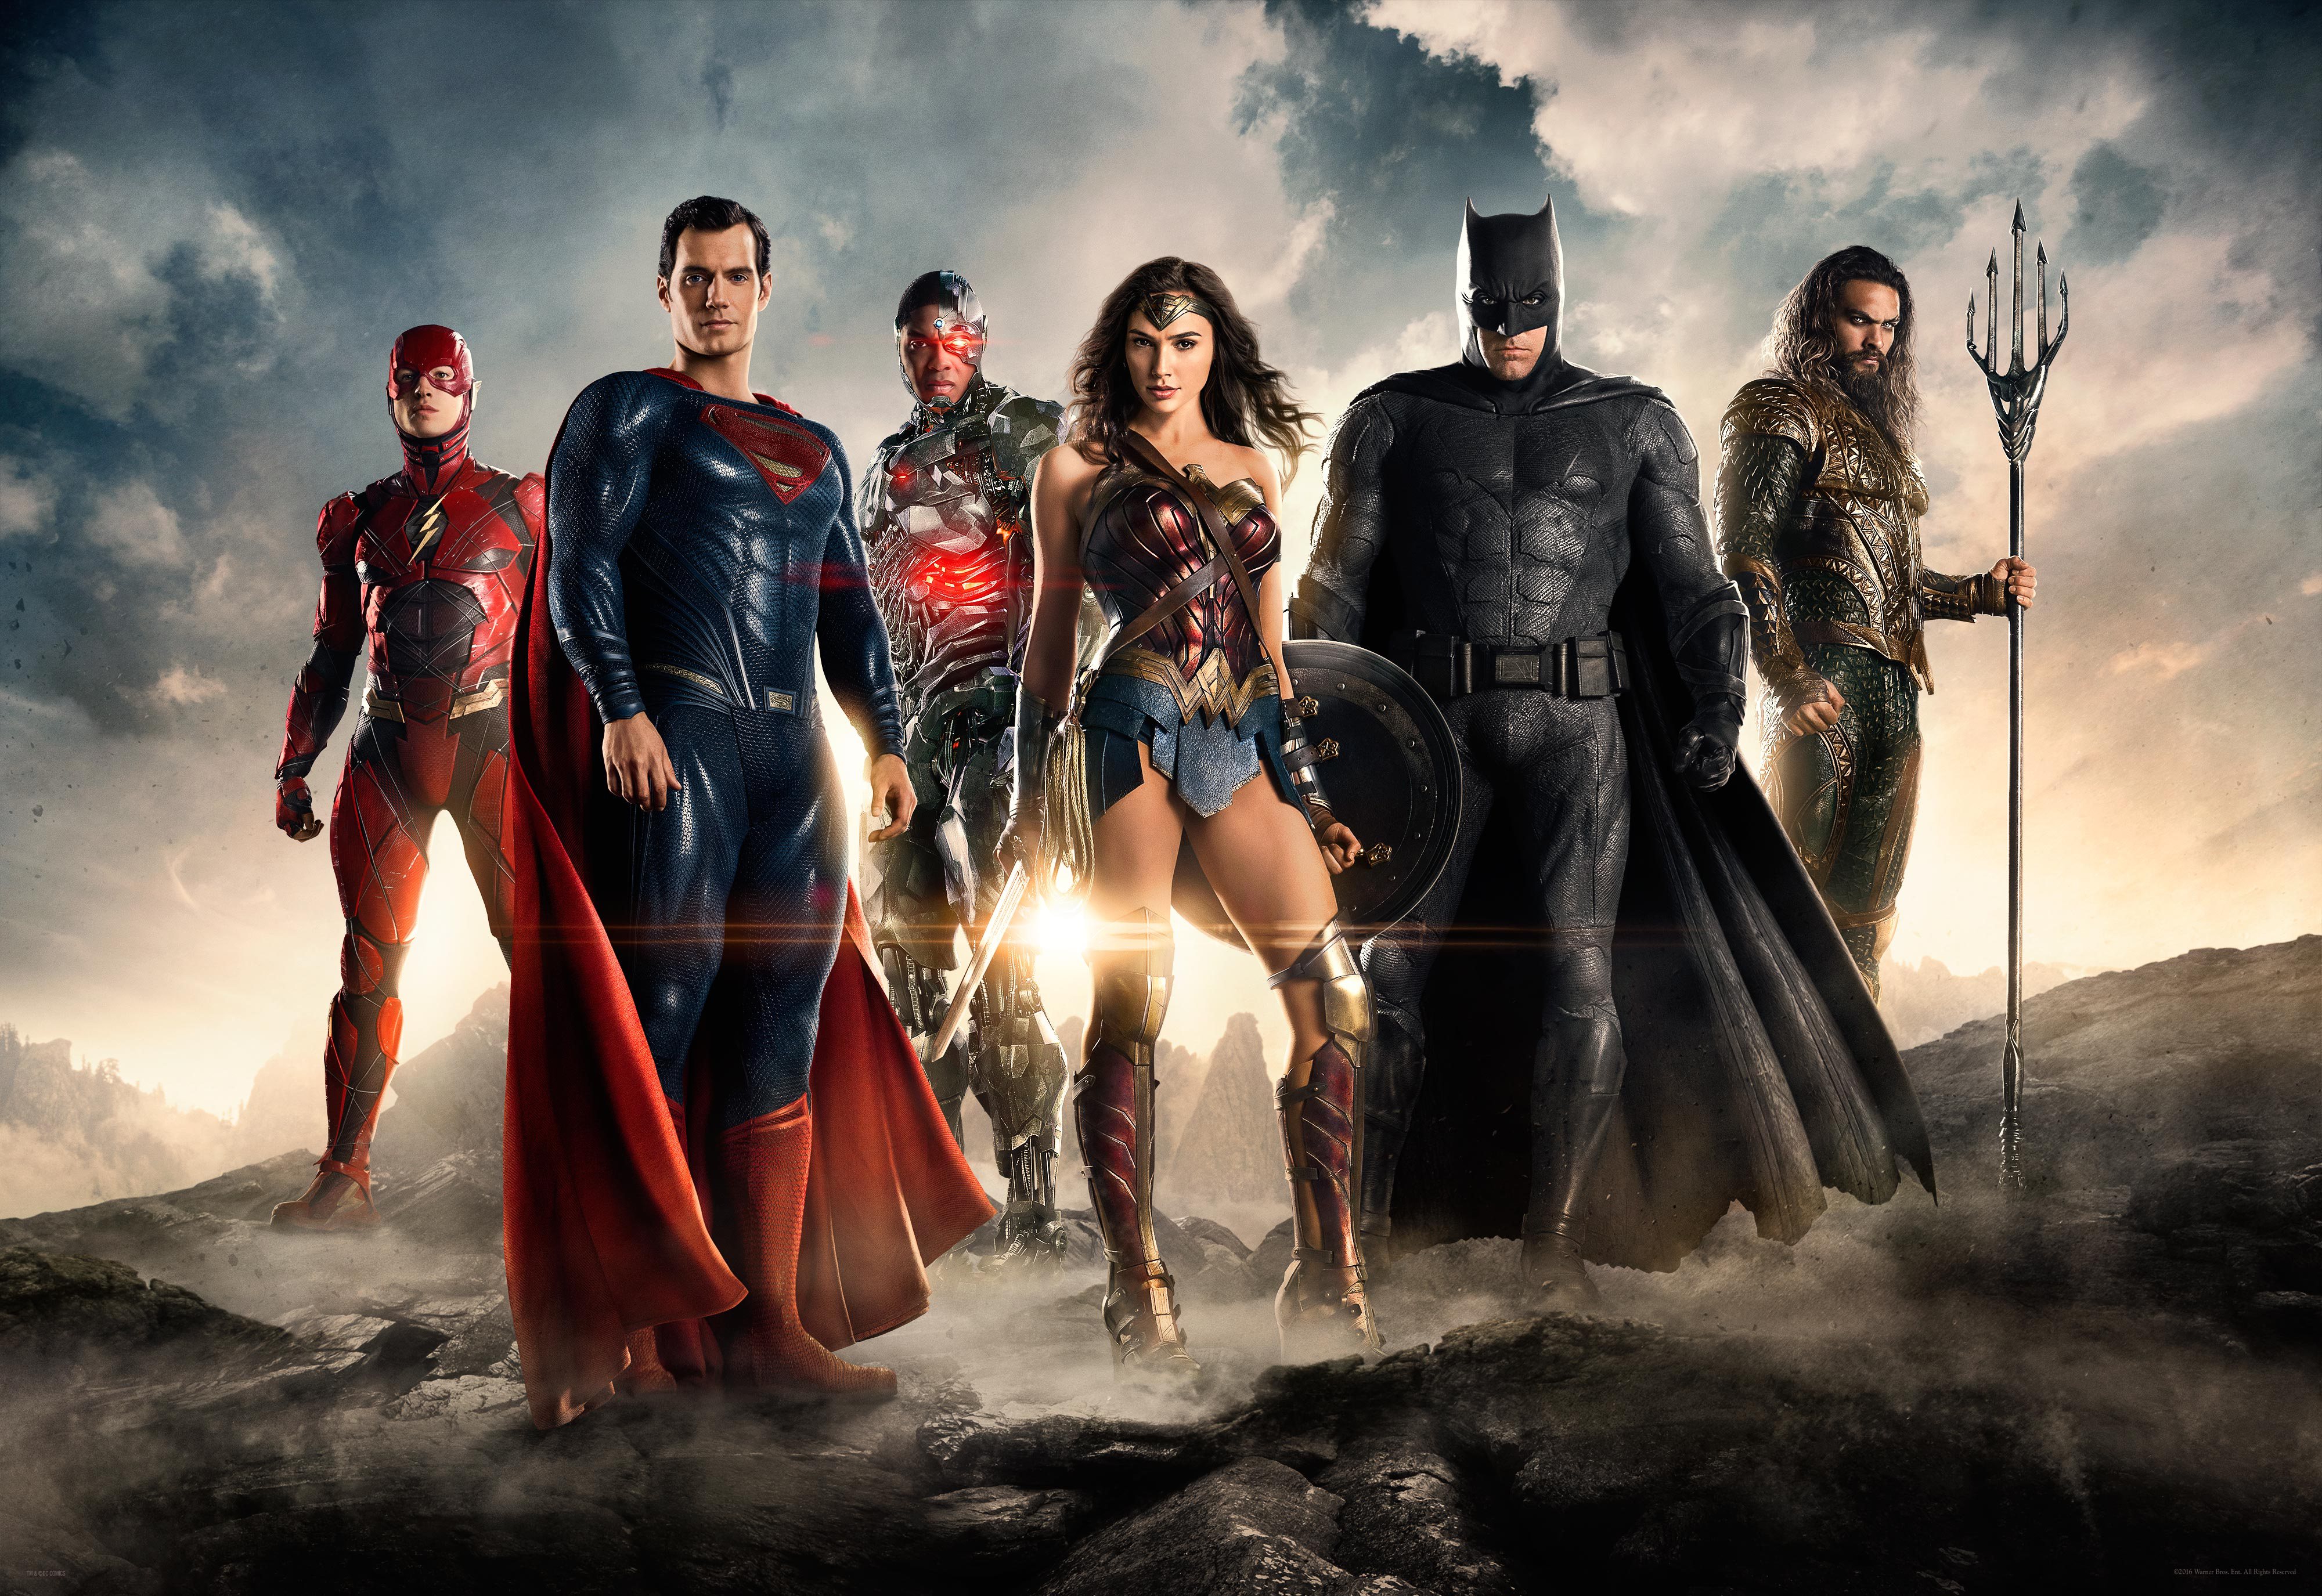 Man of Steel: The Official Movie Novelization, DC Extended Universe Wiki